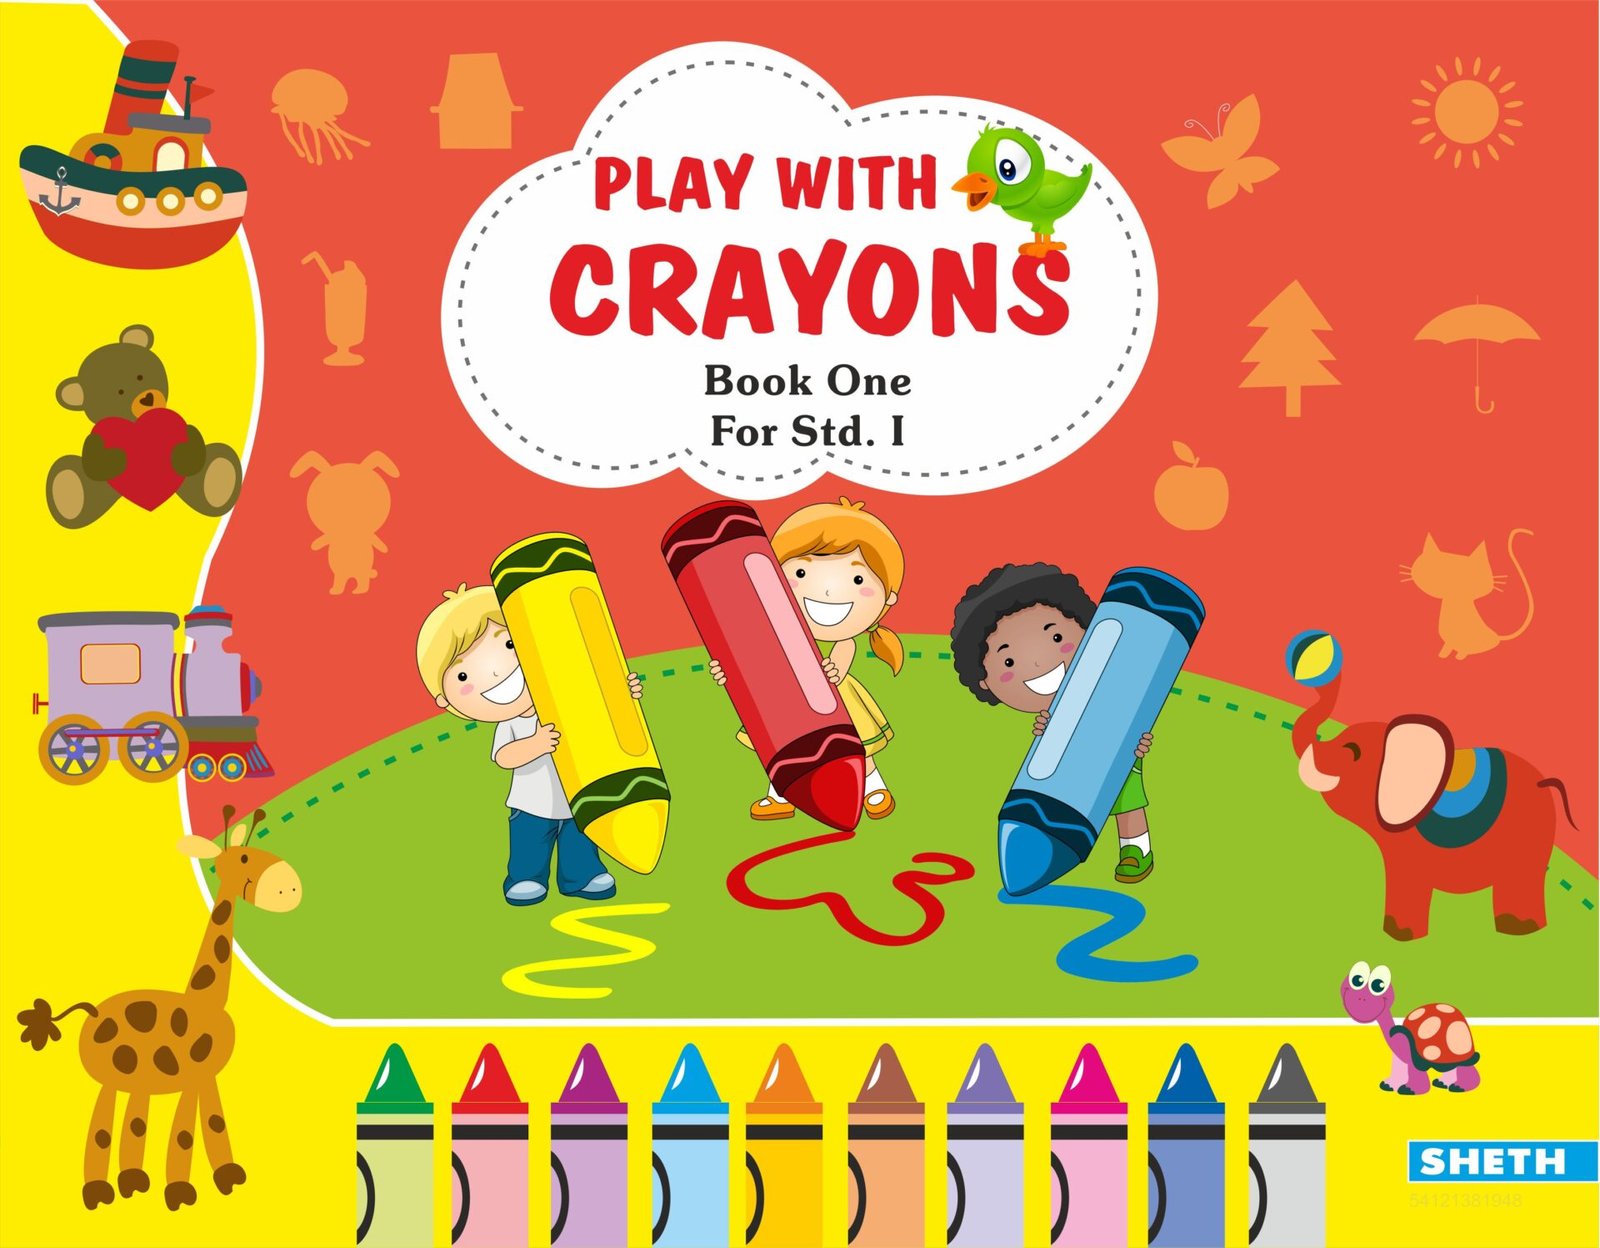 Sheth Books Play with Crayons Book 1 for Std. I 1